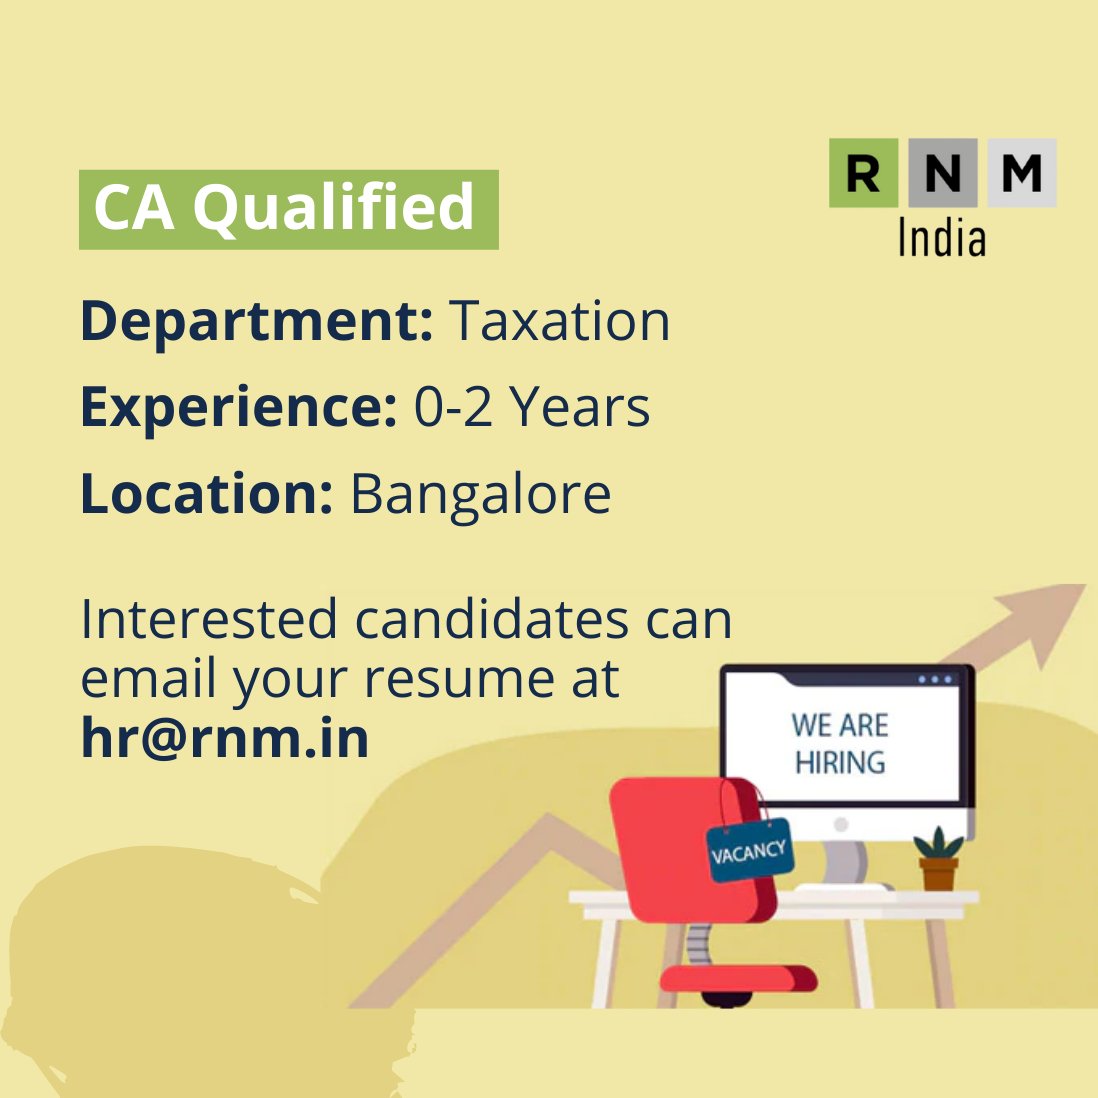 Hiring CA Qualified for our Taxation Team in Bangalore.
Interested candidates can share their resume at hr@rnm.in.
.
.
.
.
.
#HiringNow #HiringPost #Vacancy #RNM #RNMIndia #Taxation #hiring #taxjobs #delhijobs #jobsindelhi